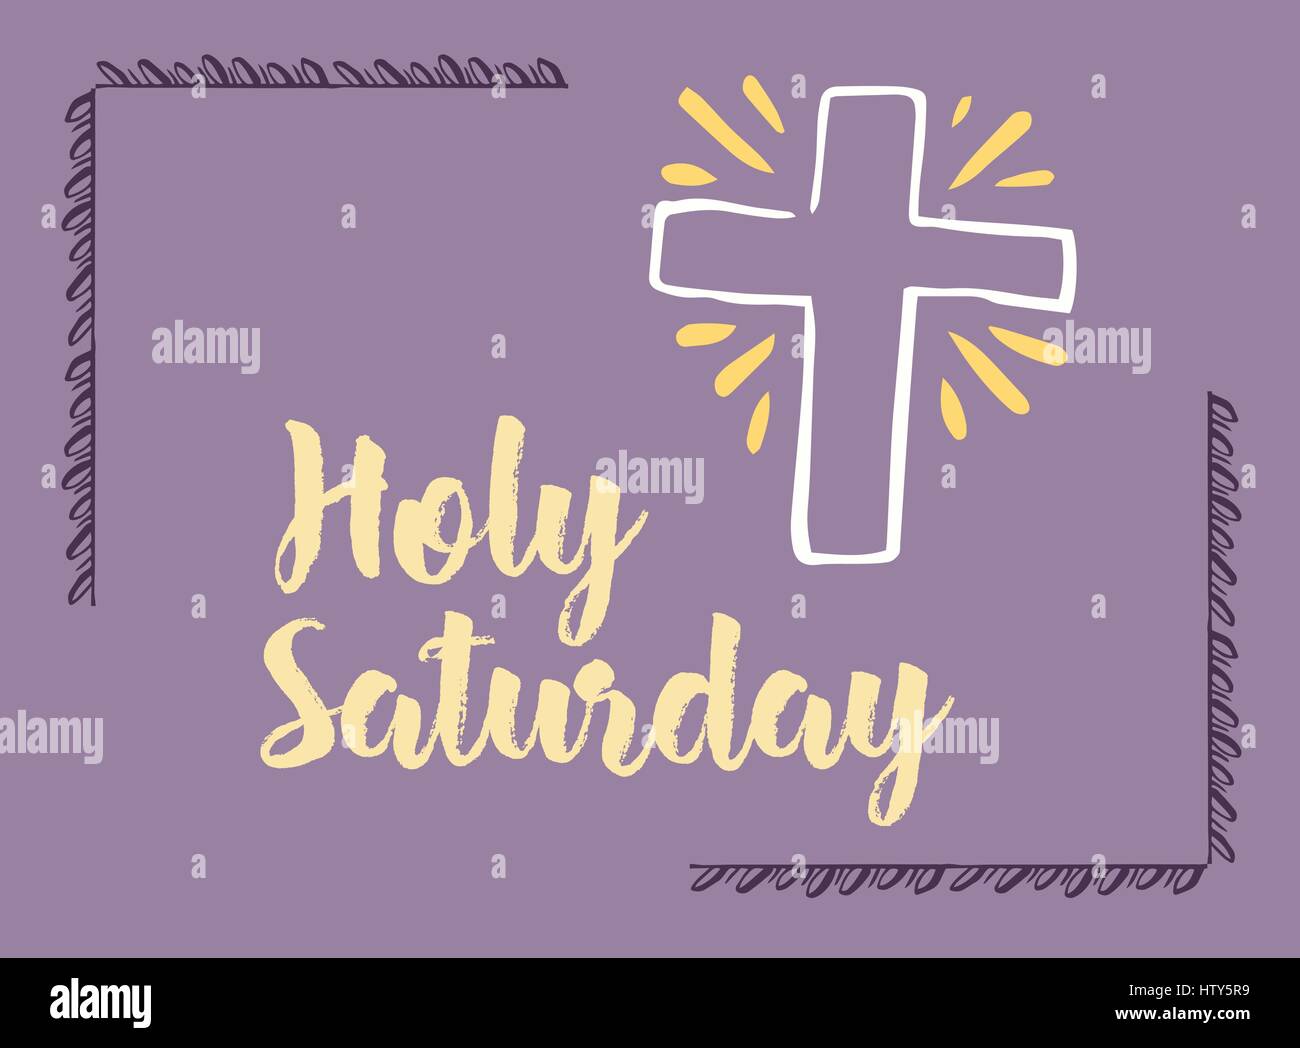 Vector of greeting card with holy saturday message Stock Vector ...